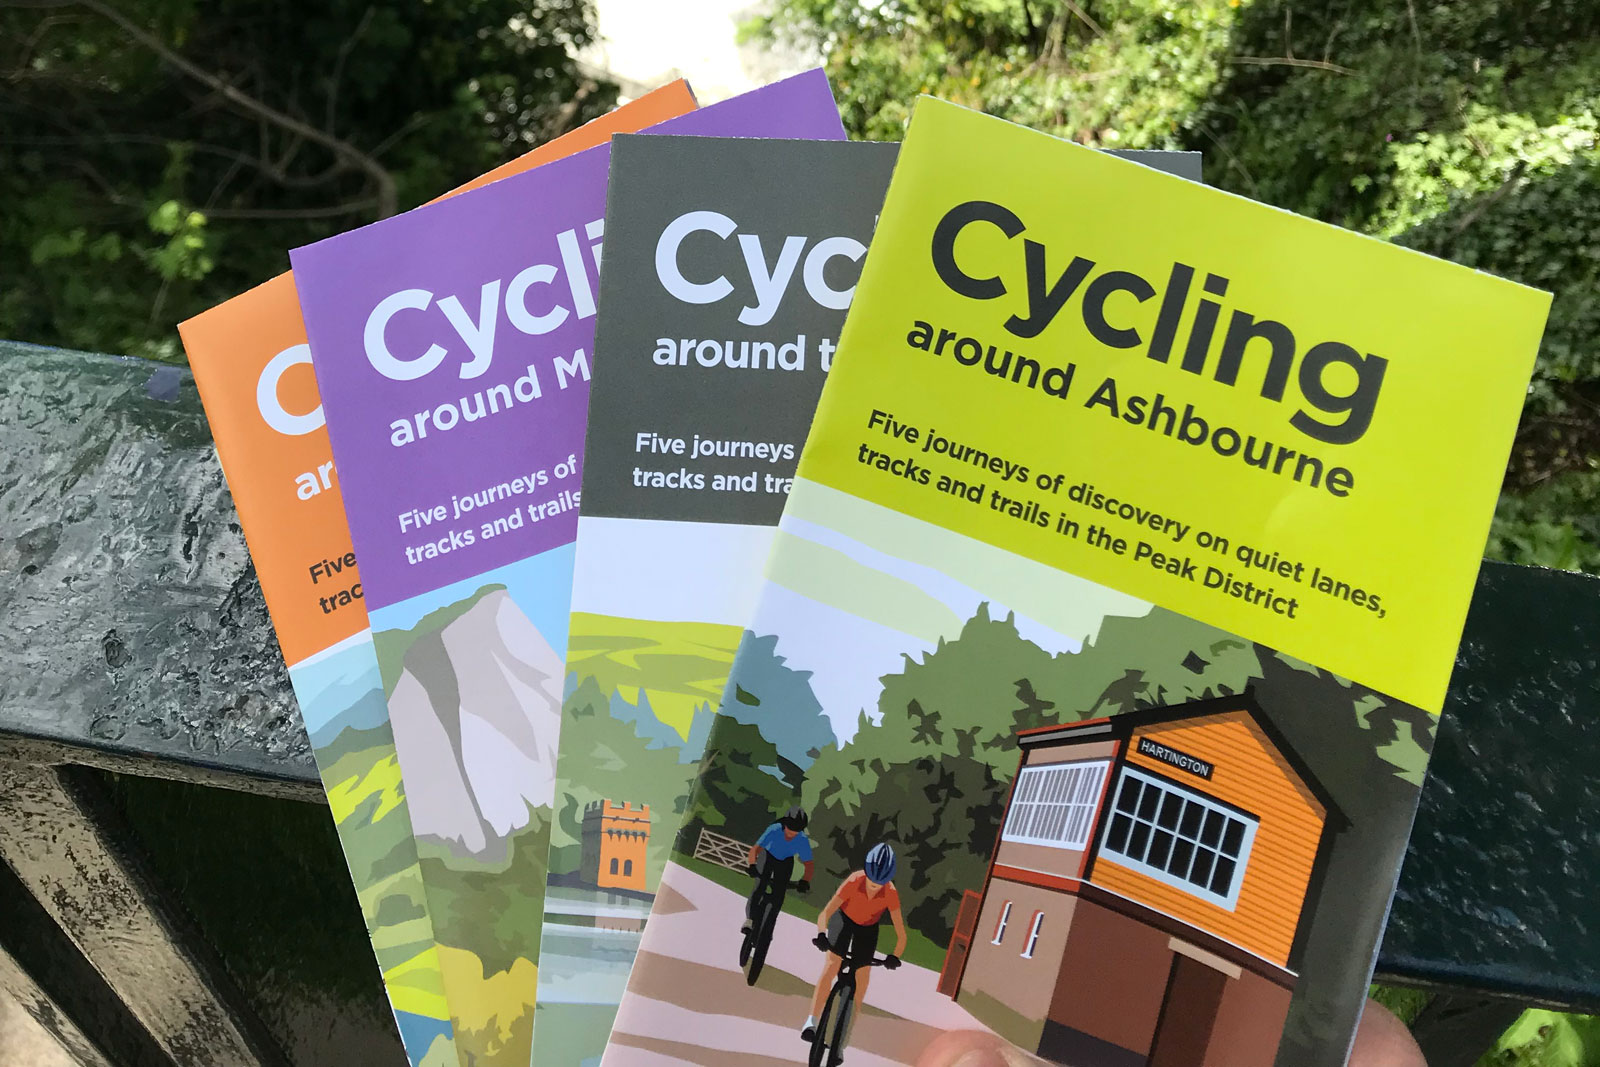 The updated Cycle Derbyshire map follows a set of four Peak District cycling guides which also oddly omitted the Goyt Valley and Buxton area of the High Peak.